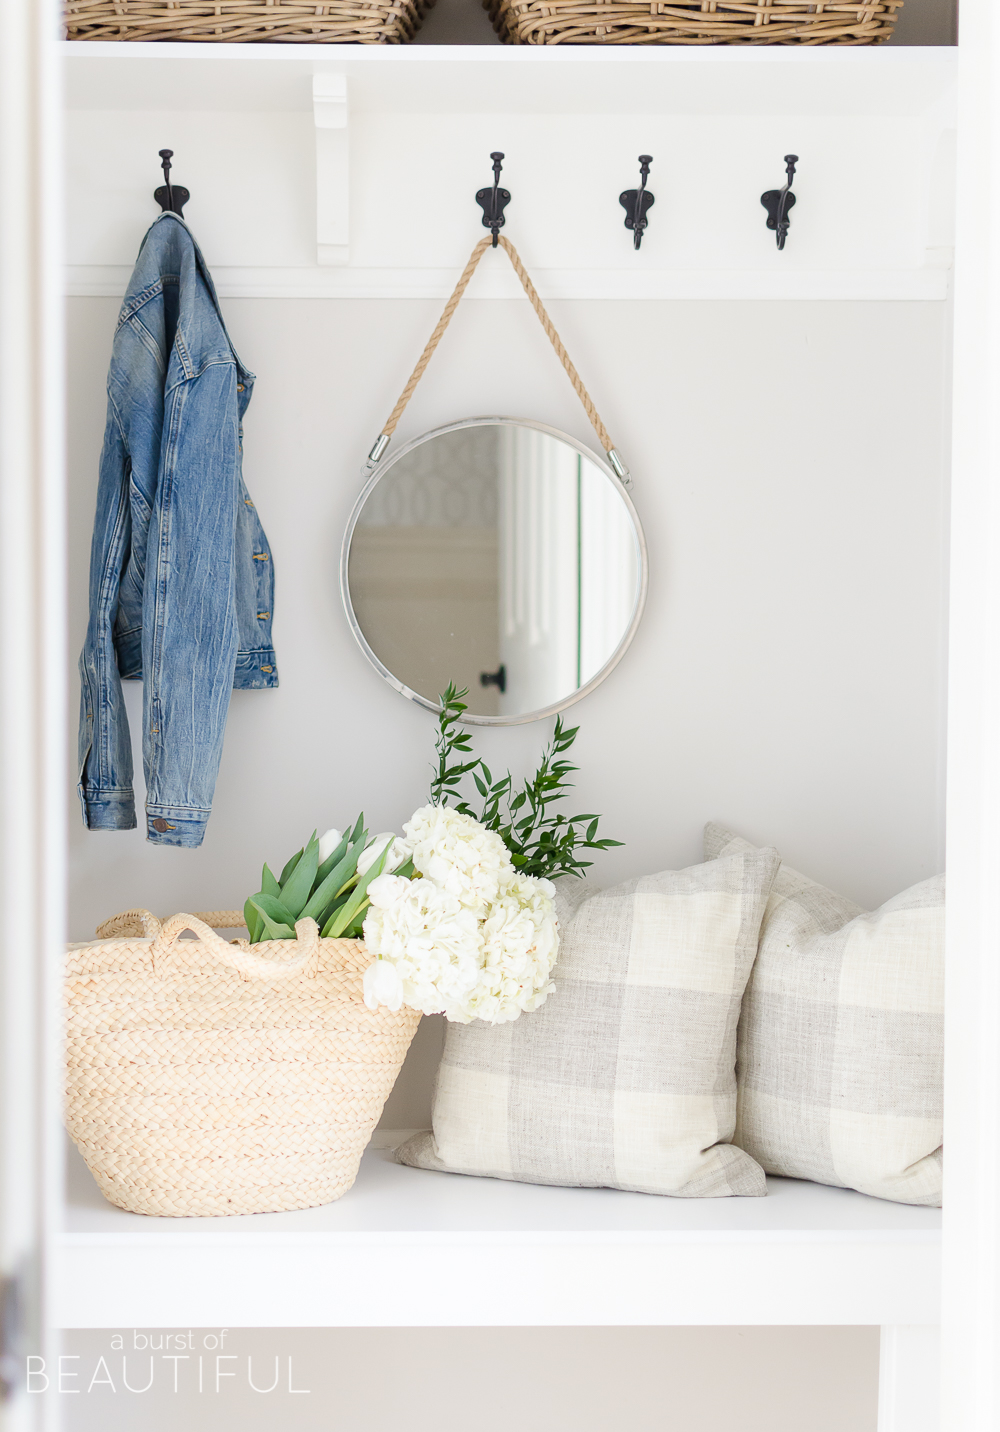 A pretty and functional mudroom is ready for the season in this modern farmhouse's bright and inviting spring home tour.